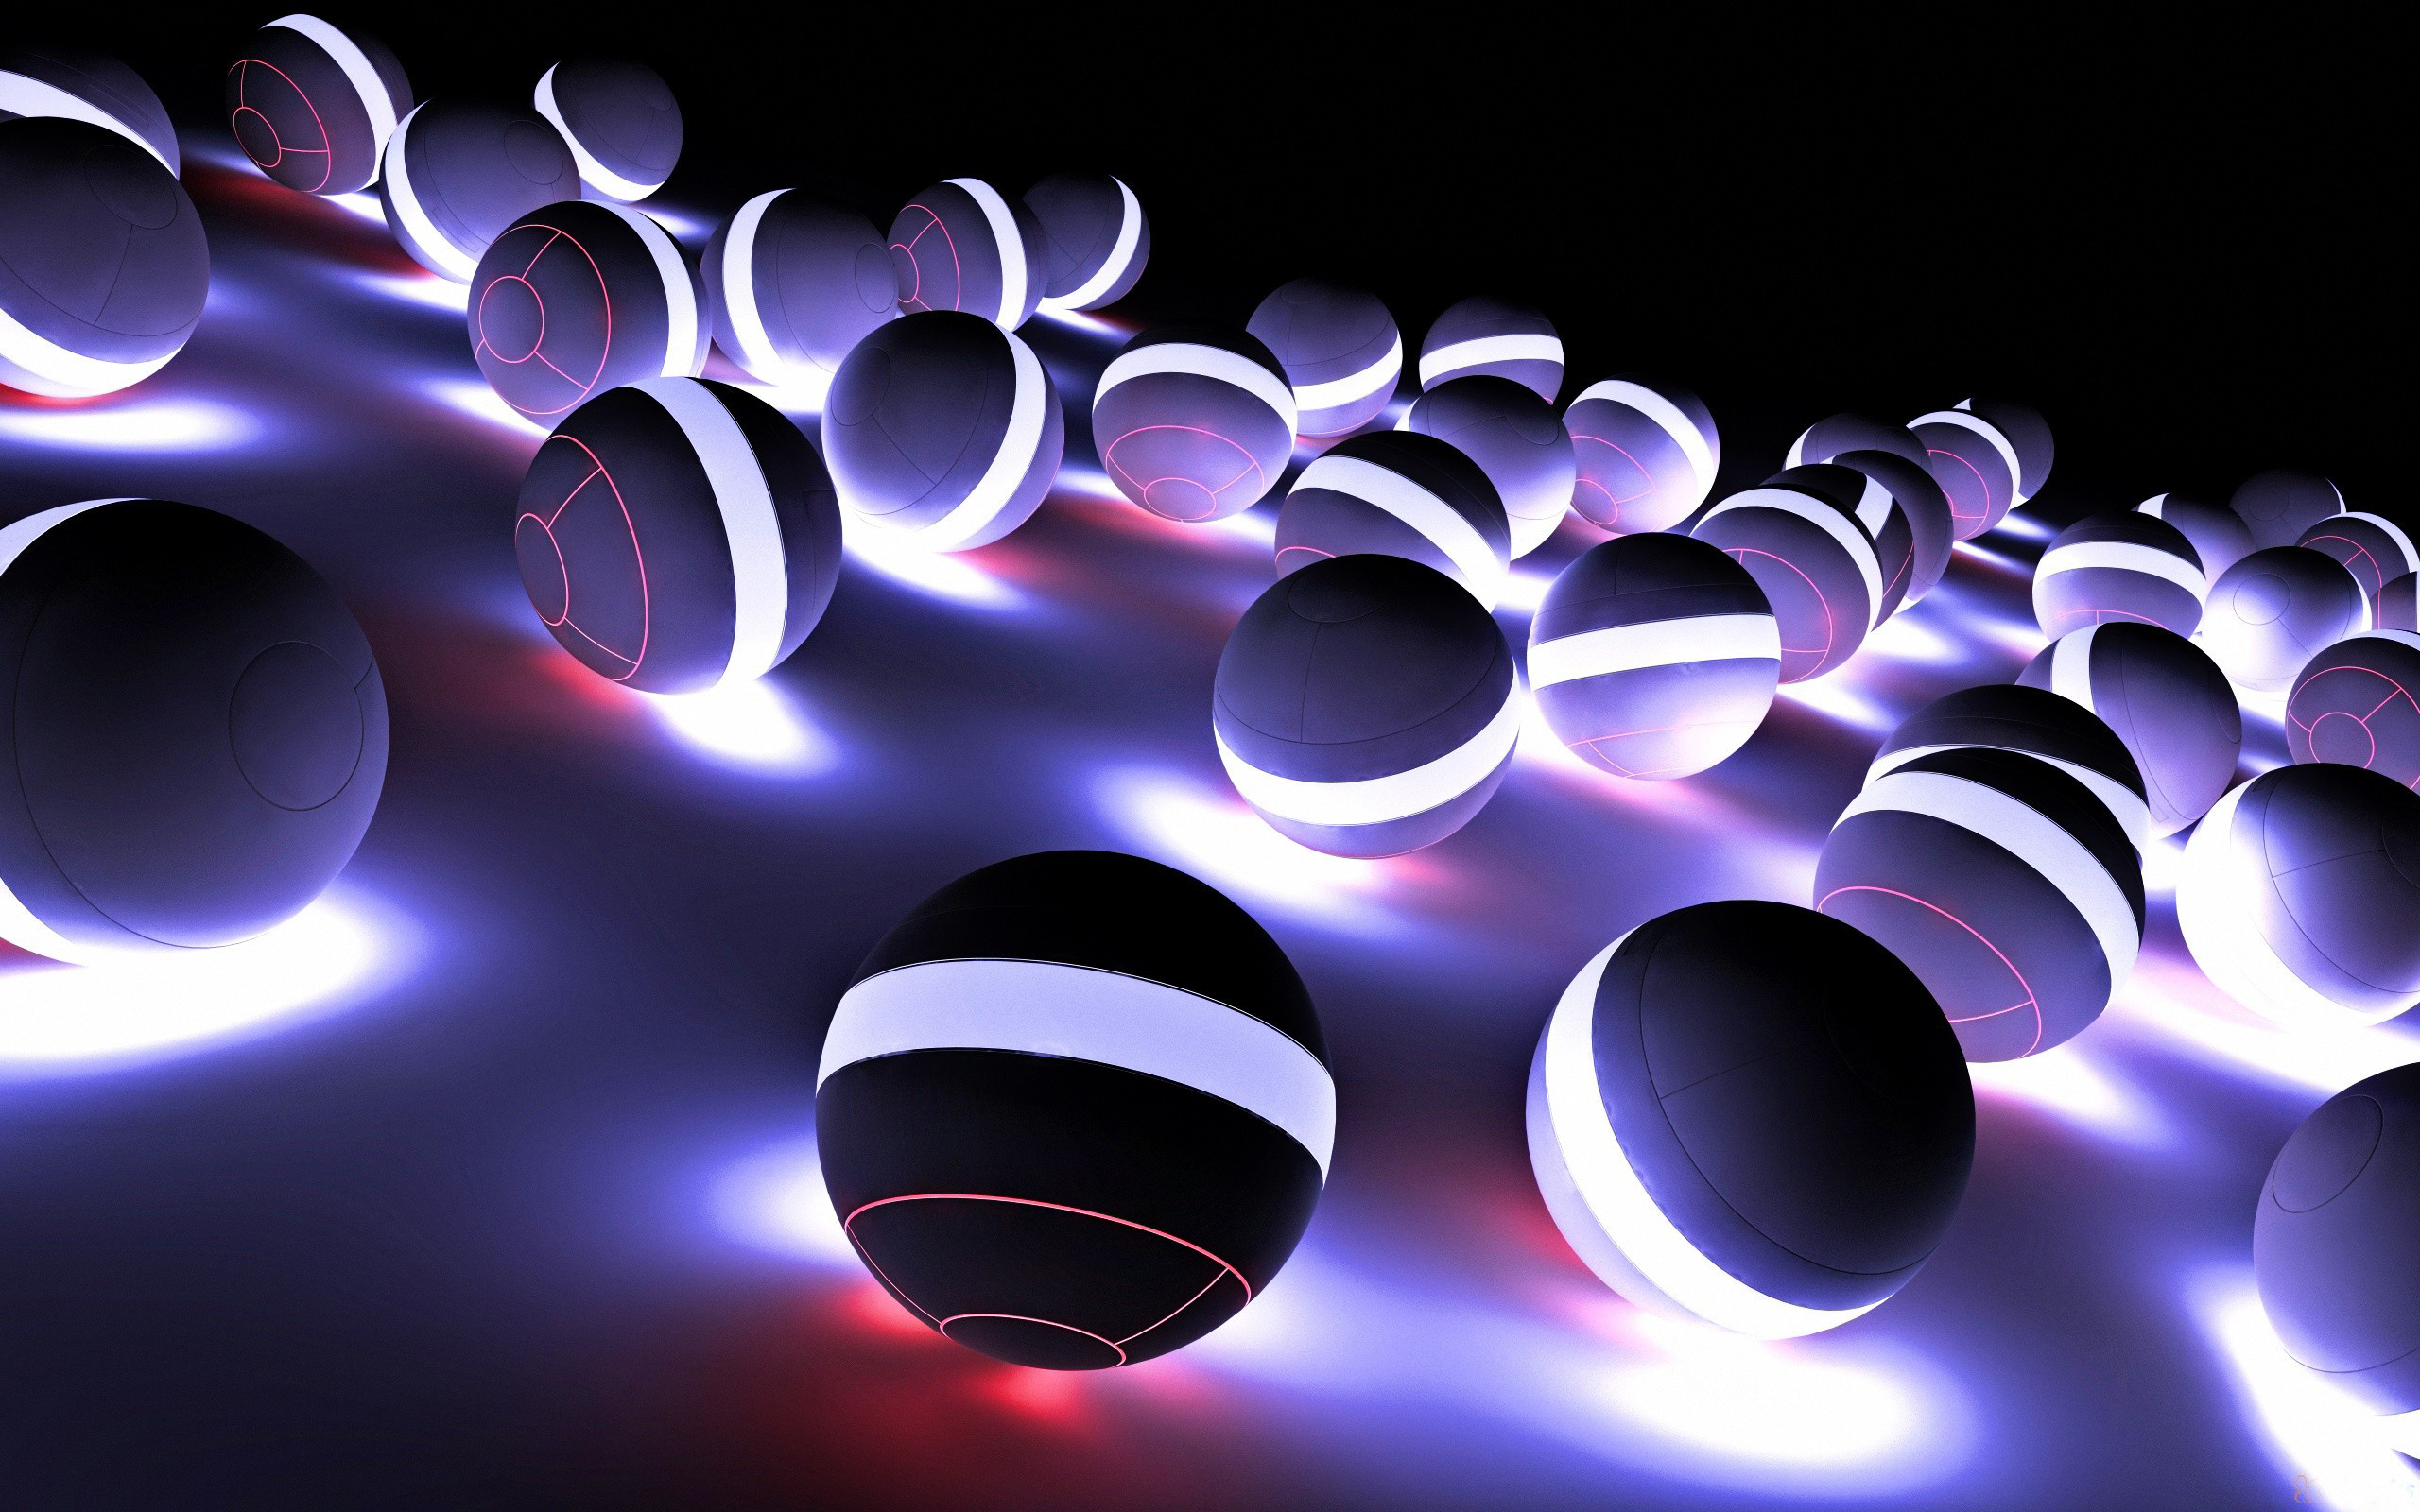 2560x1600 Full HD 3D Balls Wallpapers For Mobile